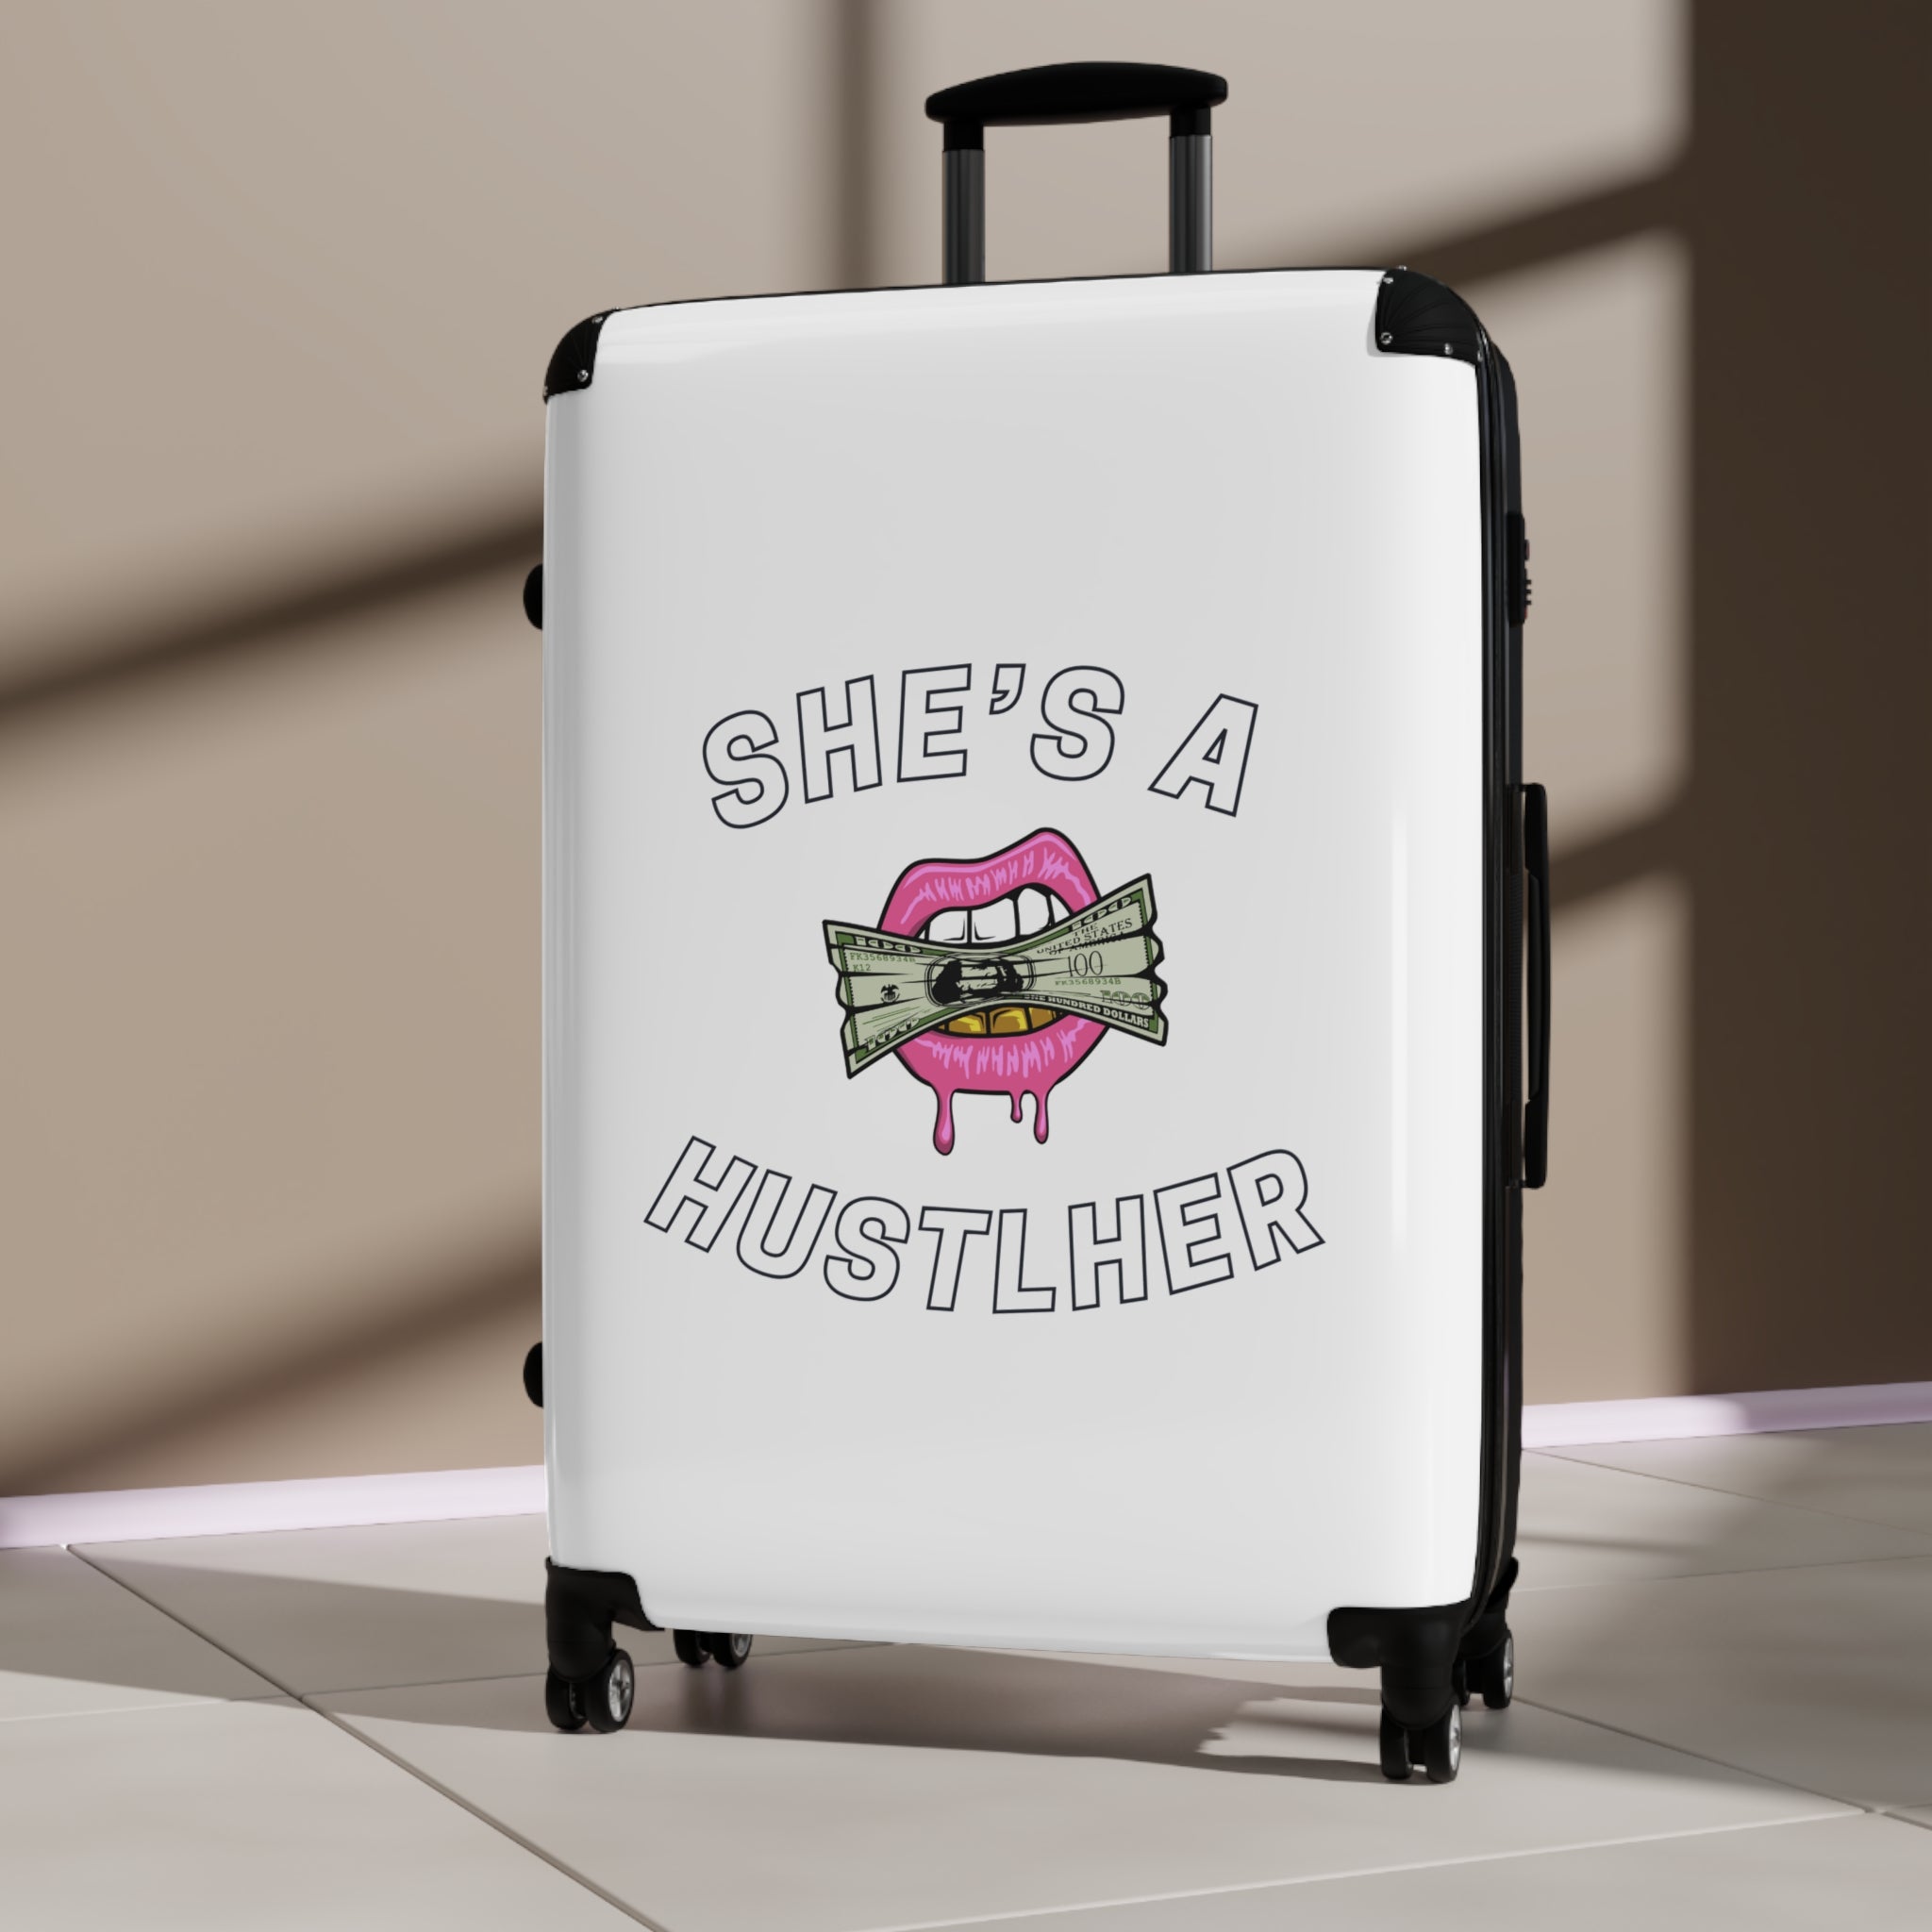 SHE'S A HUSTLHER SUITCASE